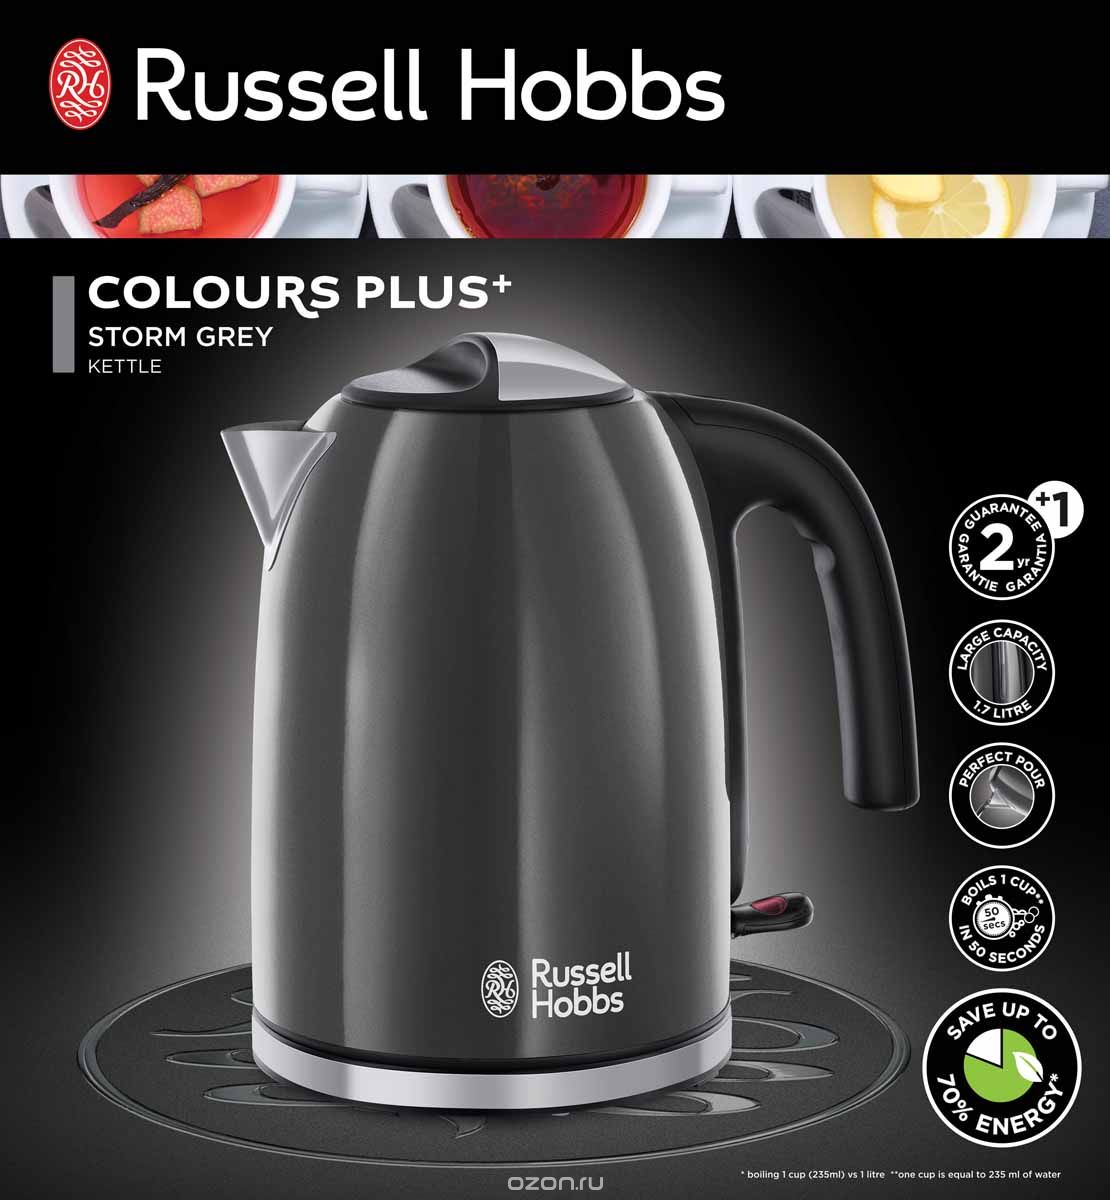   Russell Hobbs Colours Plus, 20414-70